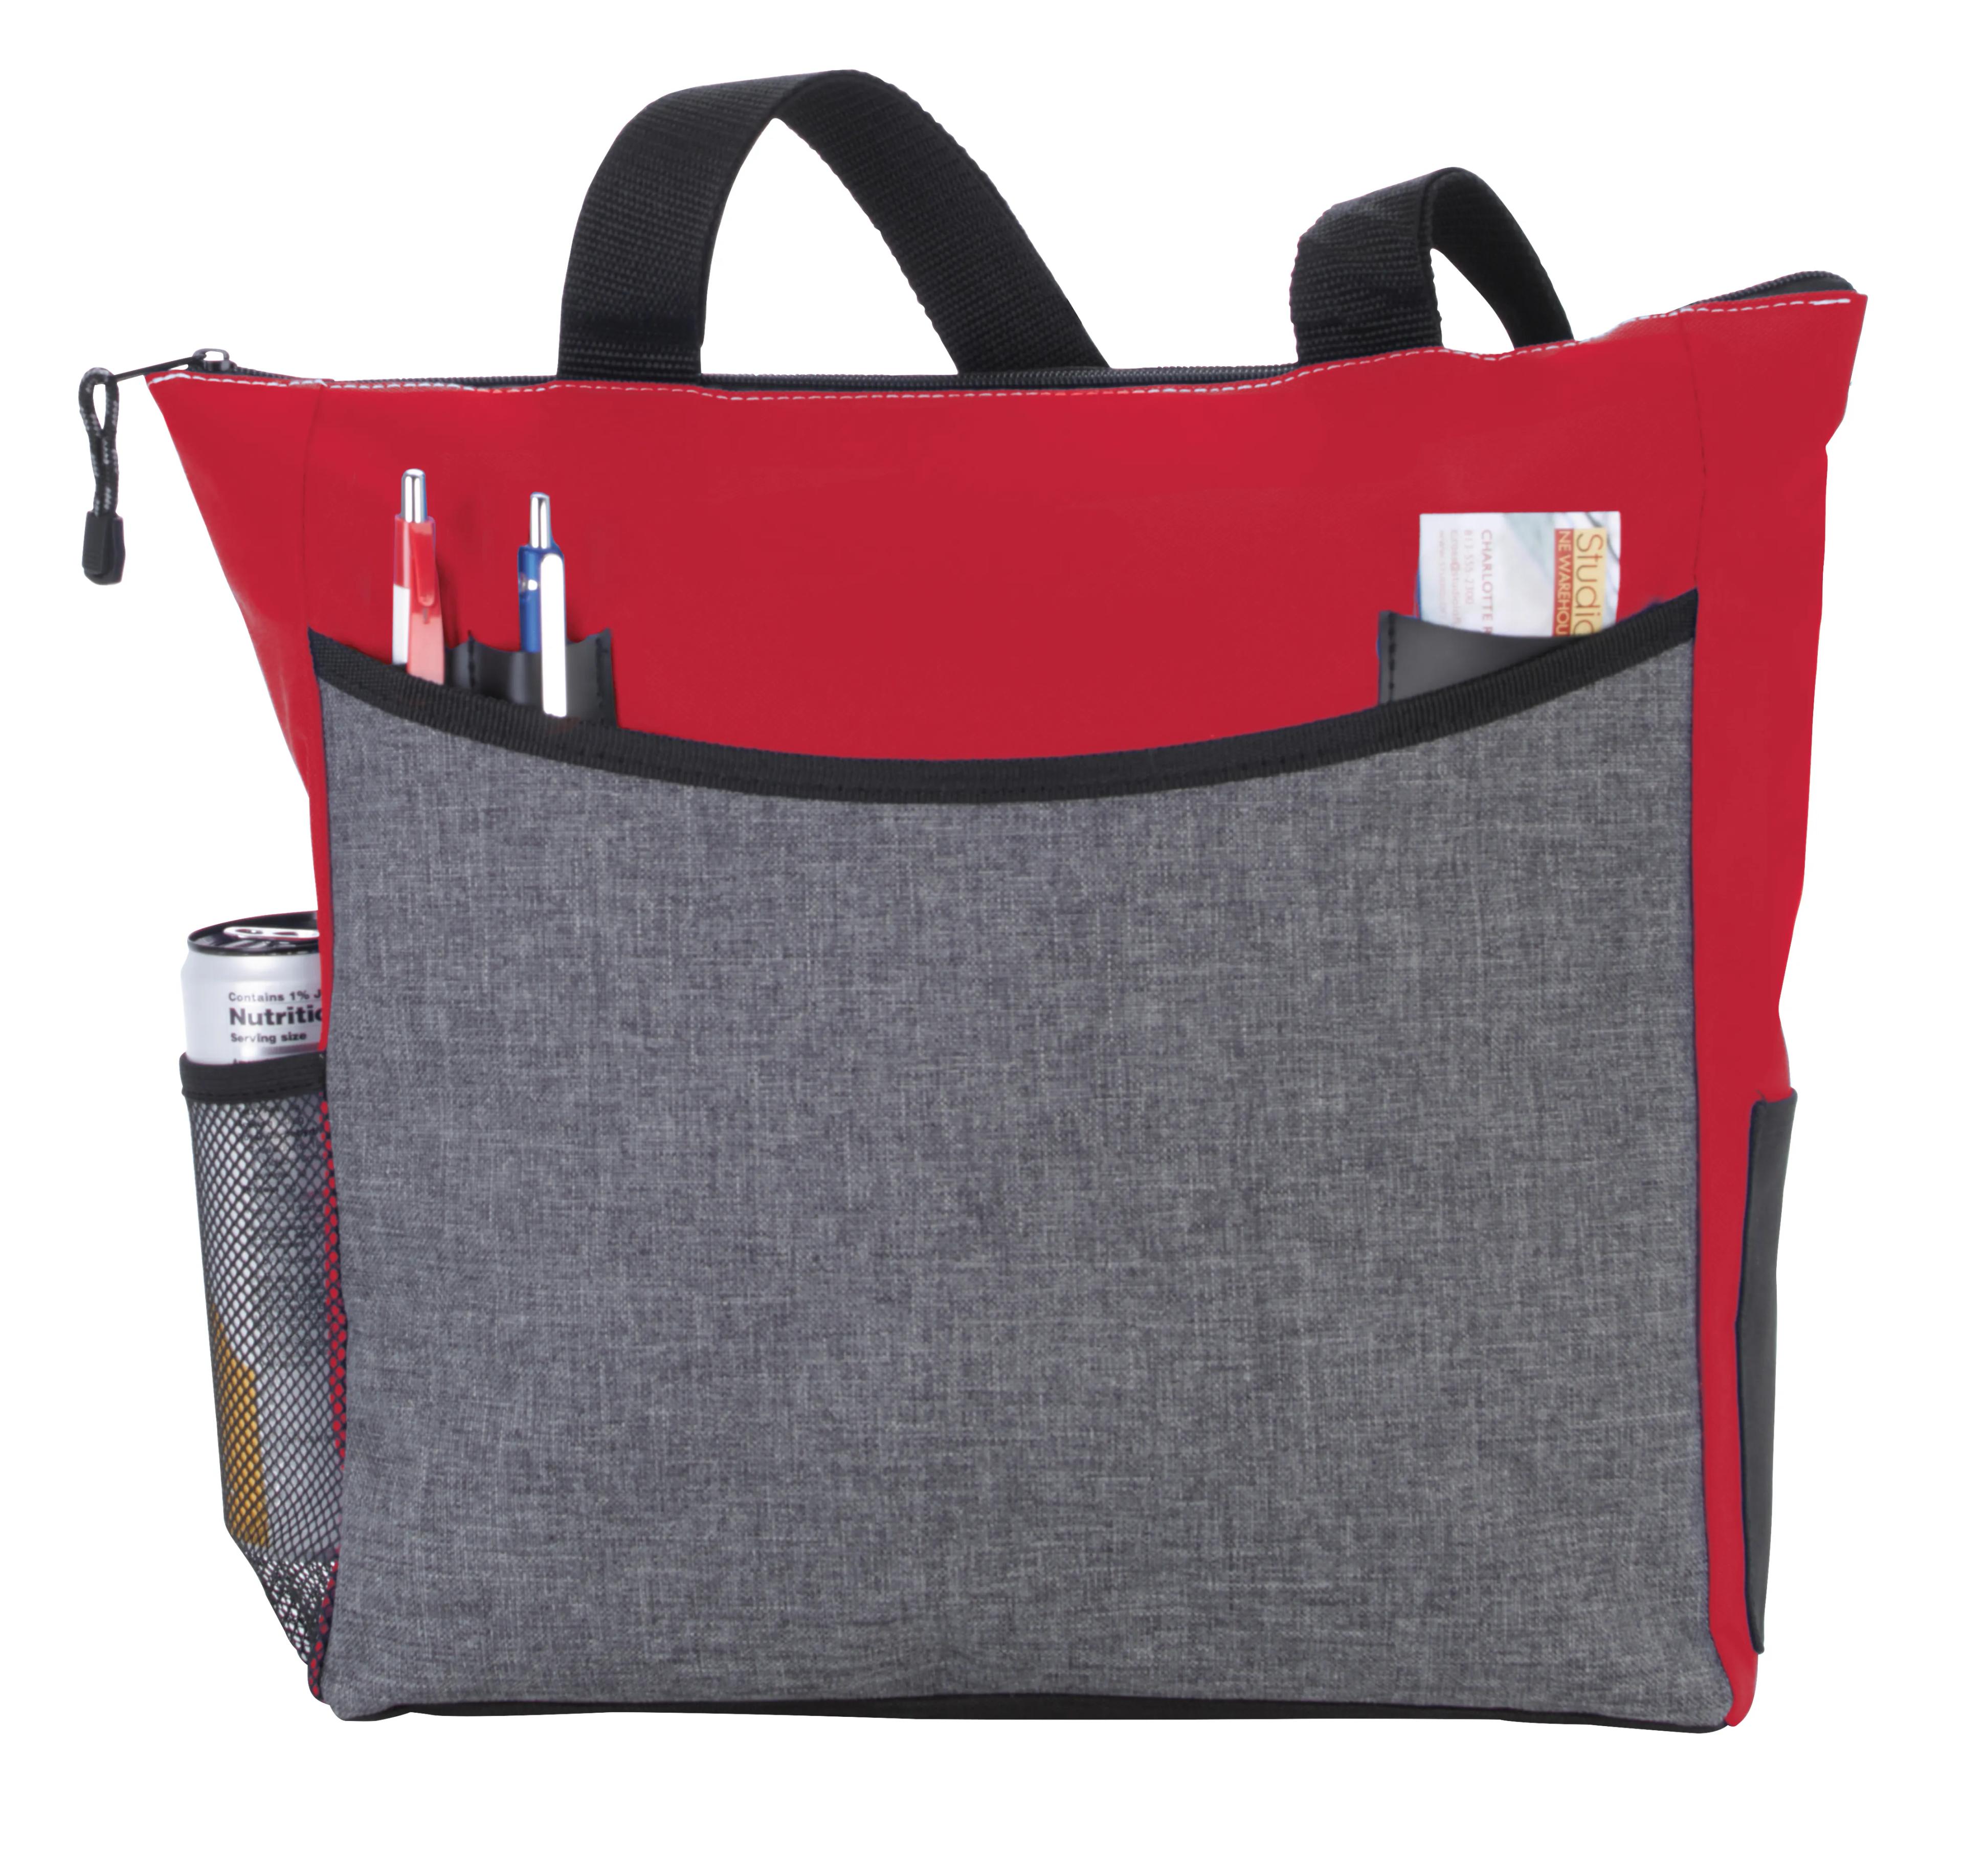 Two-Tone TranSport It Tote 28 of 29